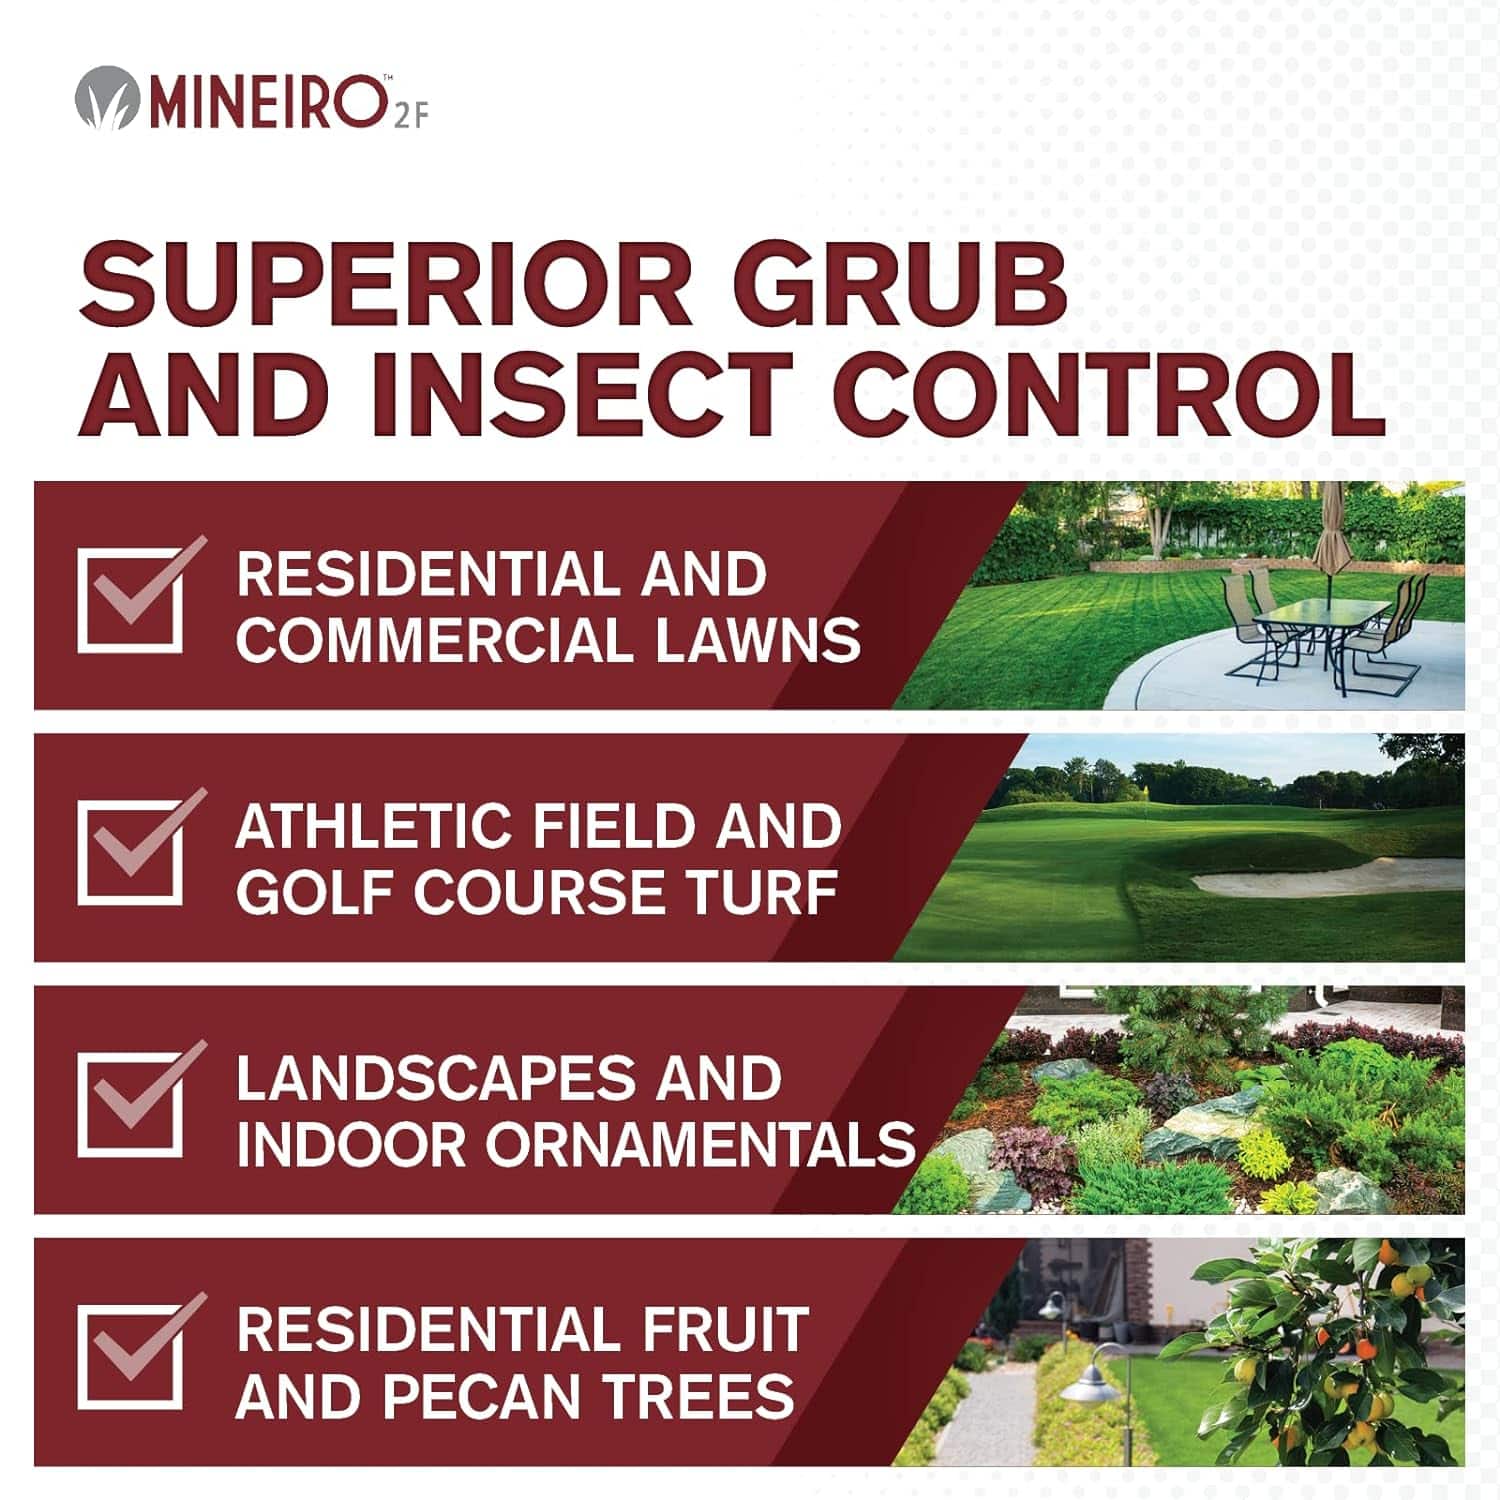 Mineiro 2F Imidacloprid Systemic Insecticide Review: The Pros' Pick for Grub and Insect Control